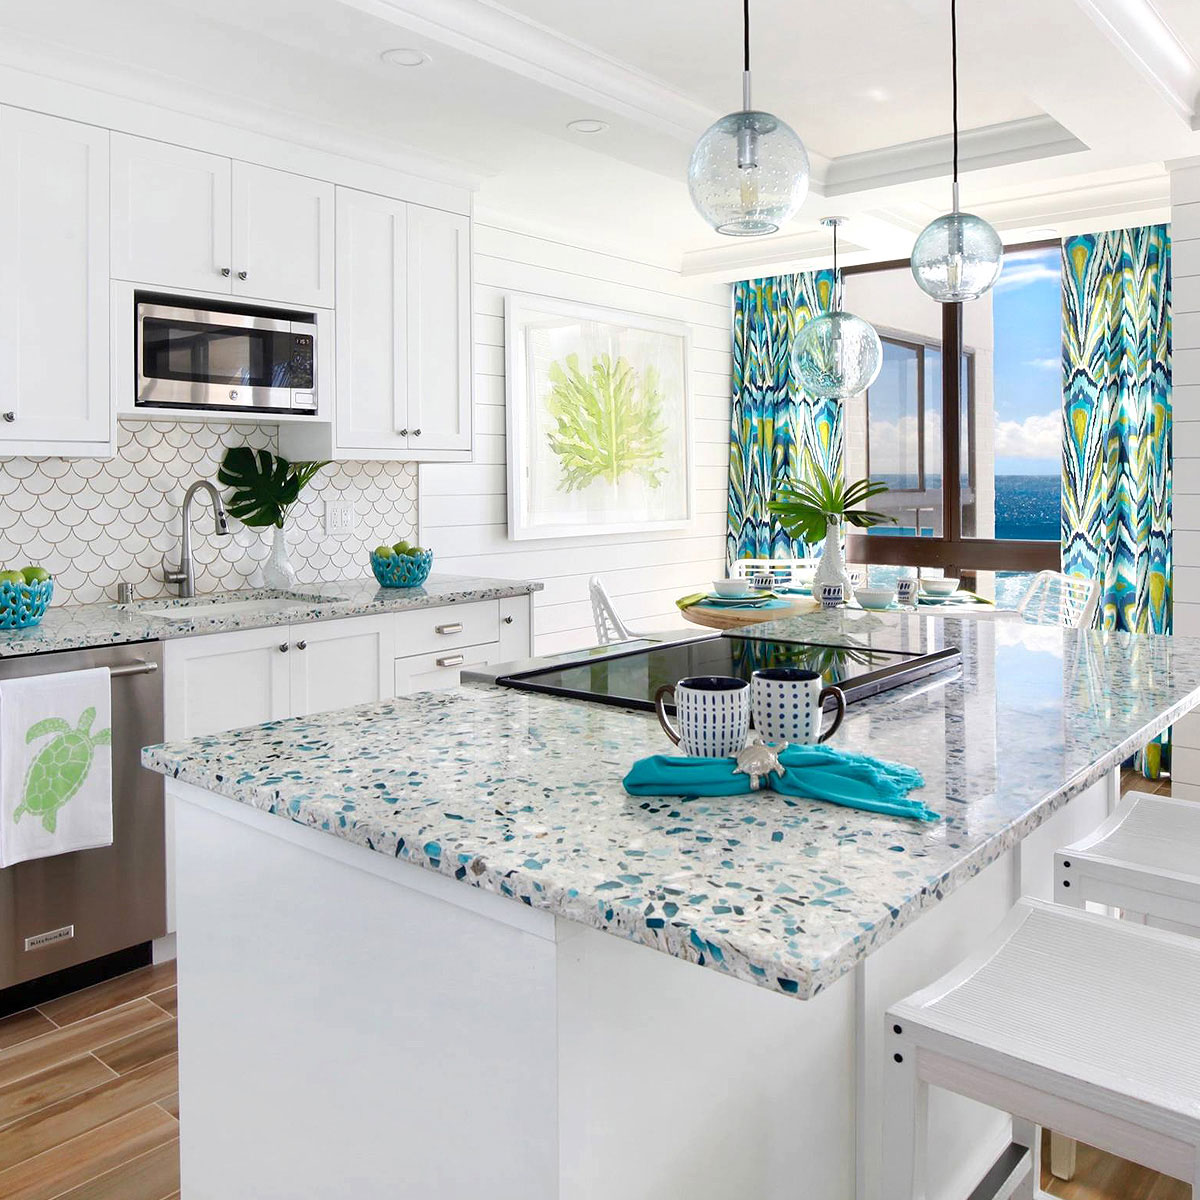 California Recycled Glass Countertops, How To Install Recycled Glass Countertops